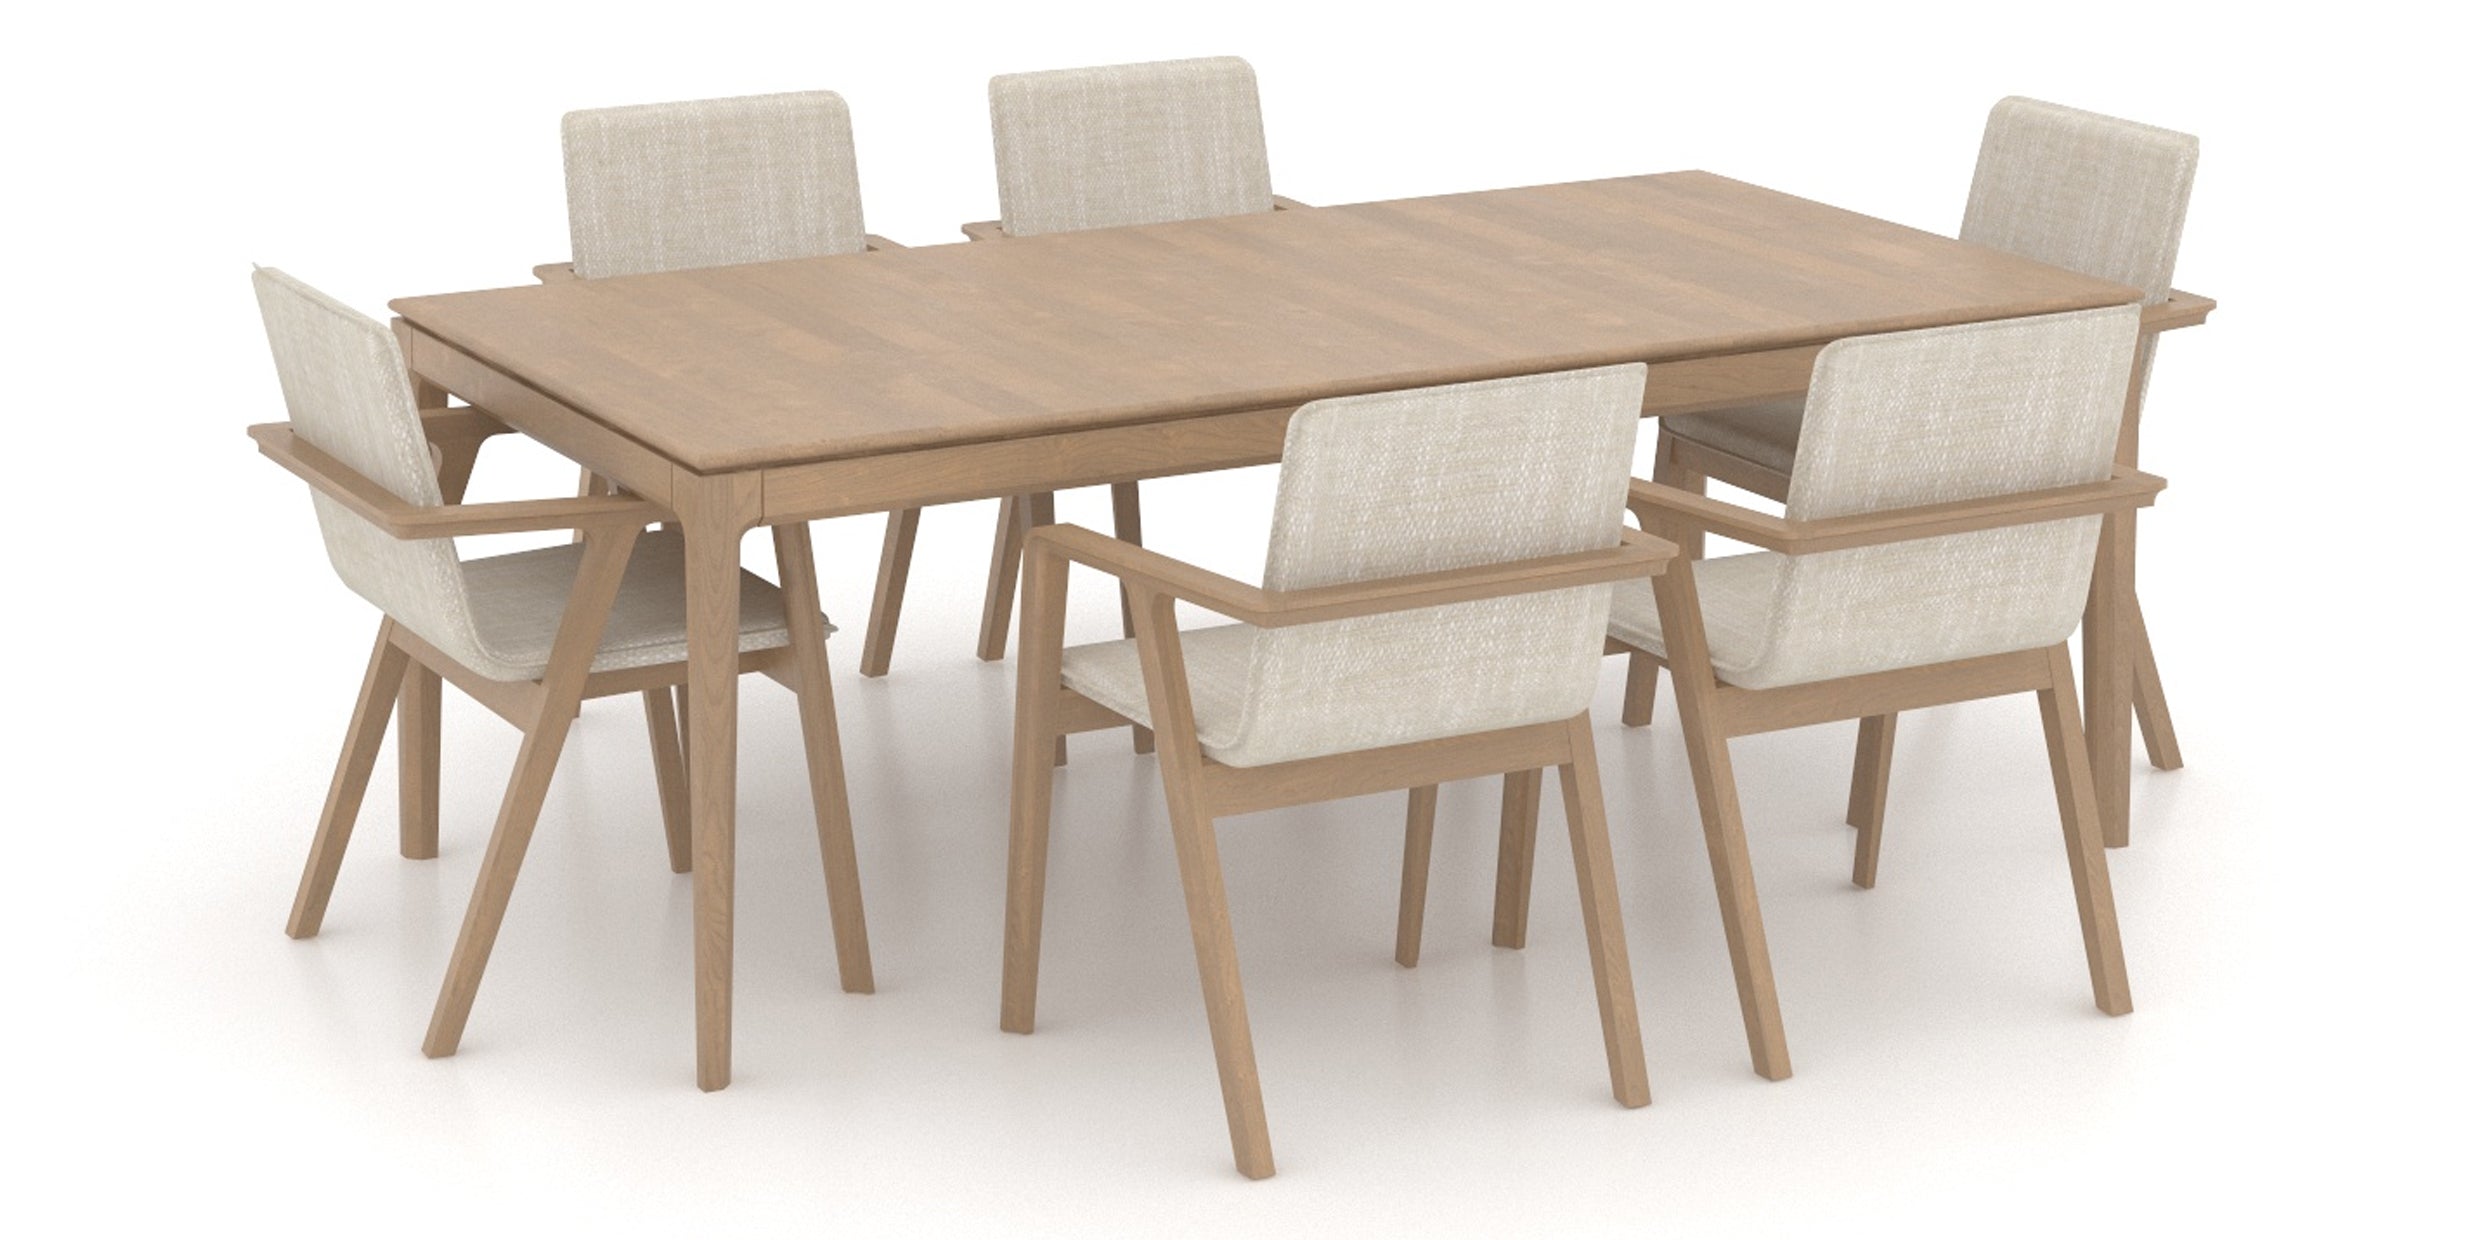 Caramel Washed Birch with Matte Finish and FT InsideOut Fabric | Canadel Downtown 4080 Dining Set | Valley Ridge Furniture